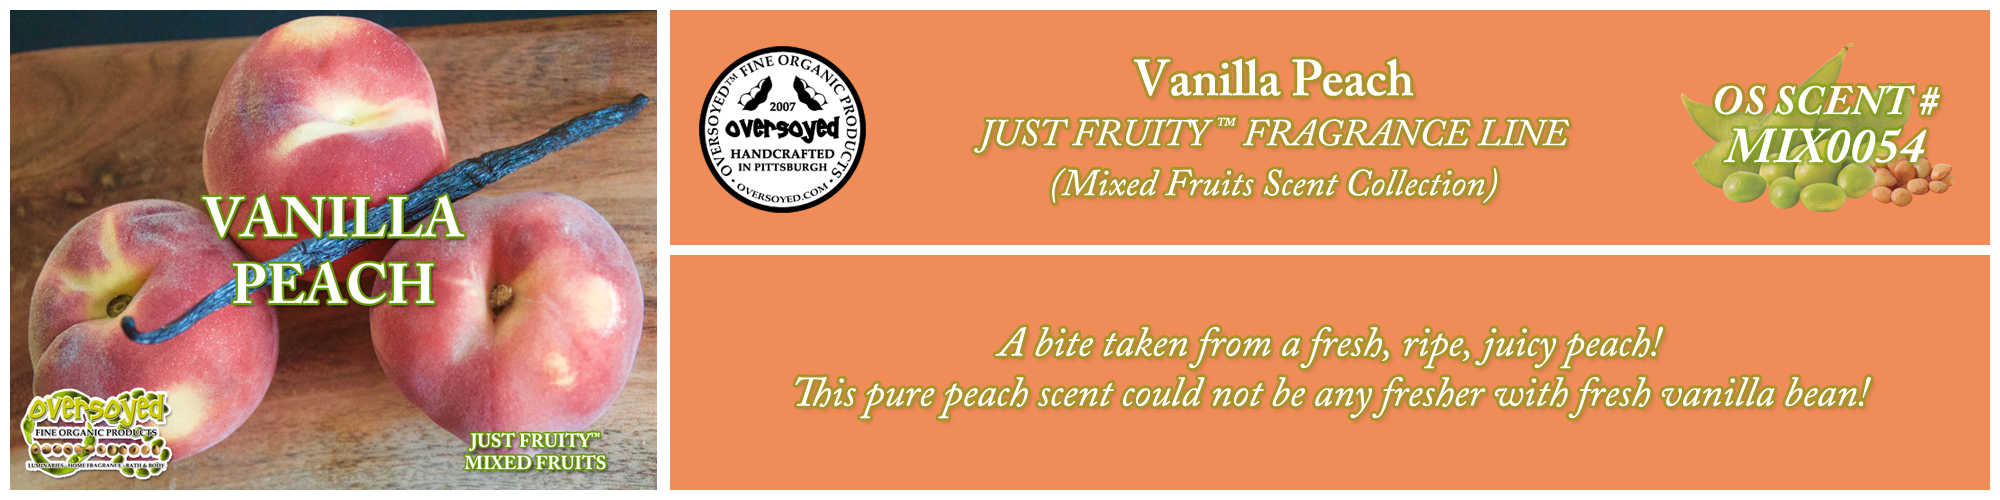 Vanilla Peach Handcrafted Products Collection